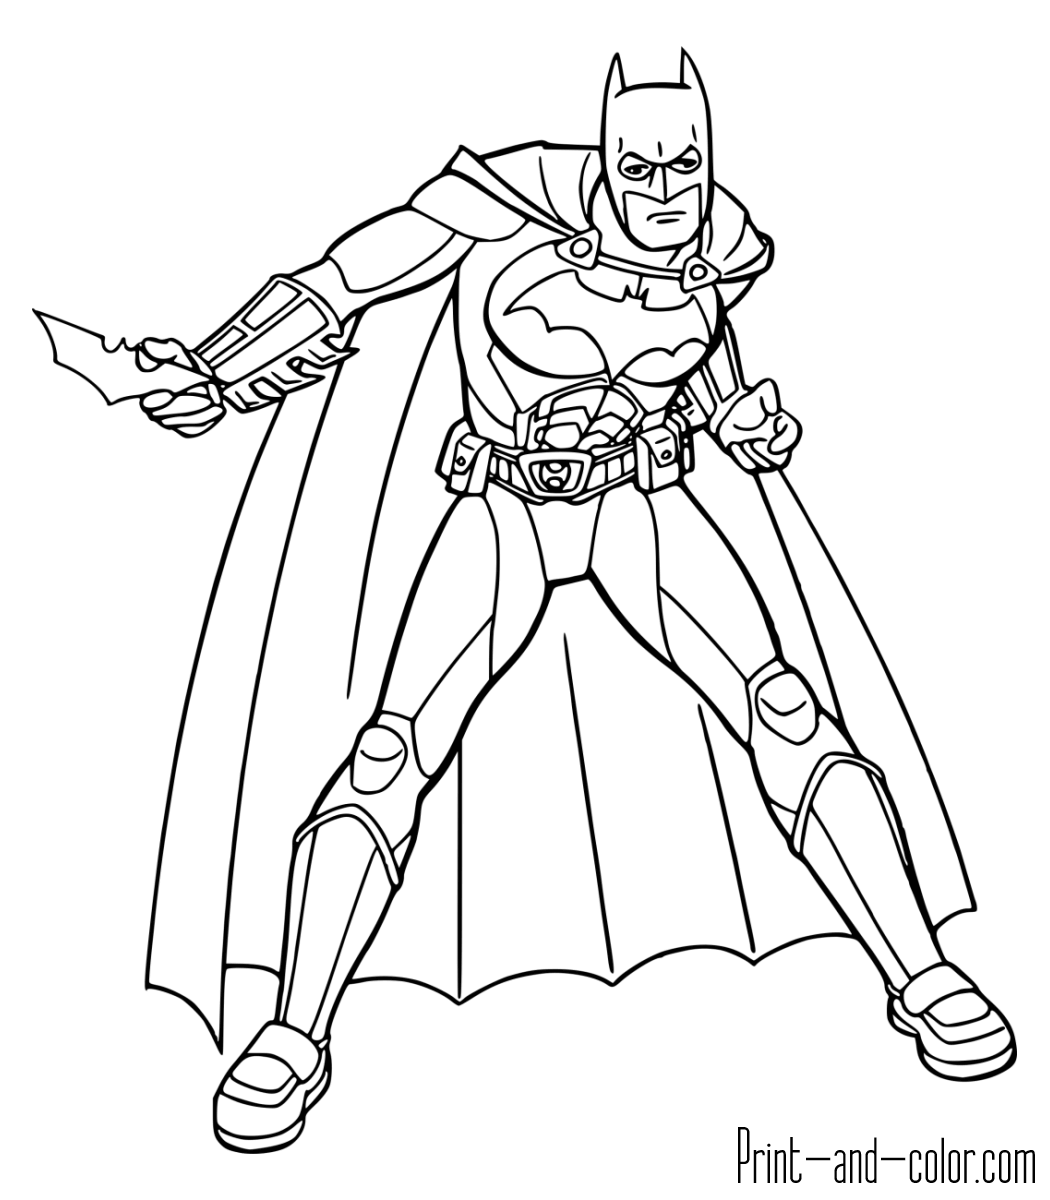 Batman Coloring Pages For Adults at GetColorings.com | Free printable